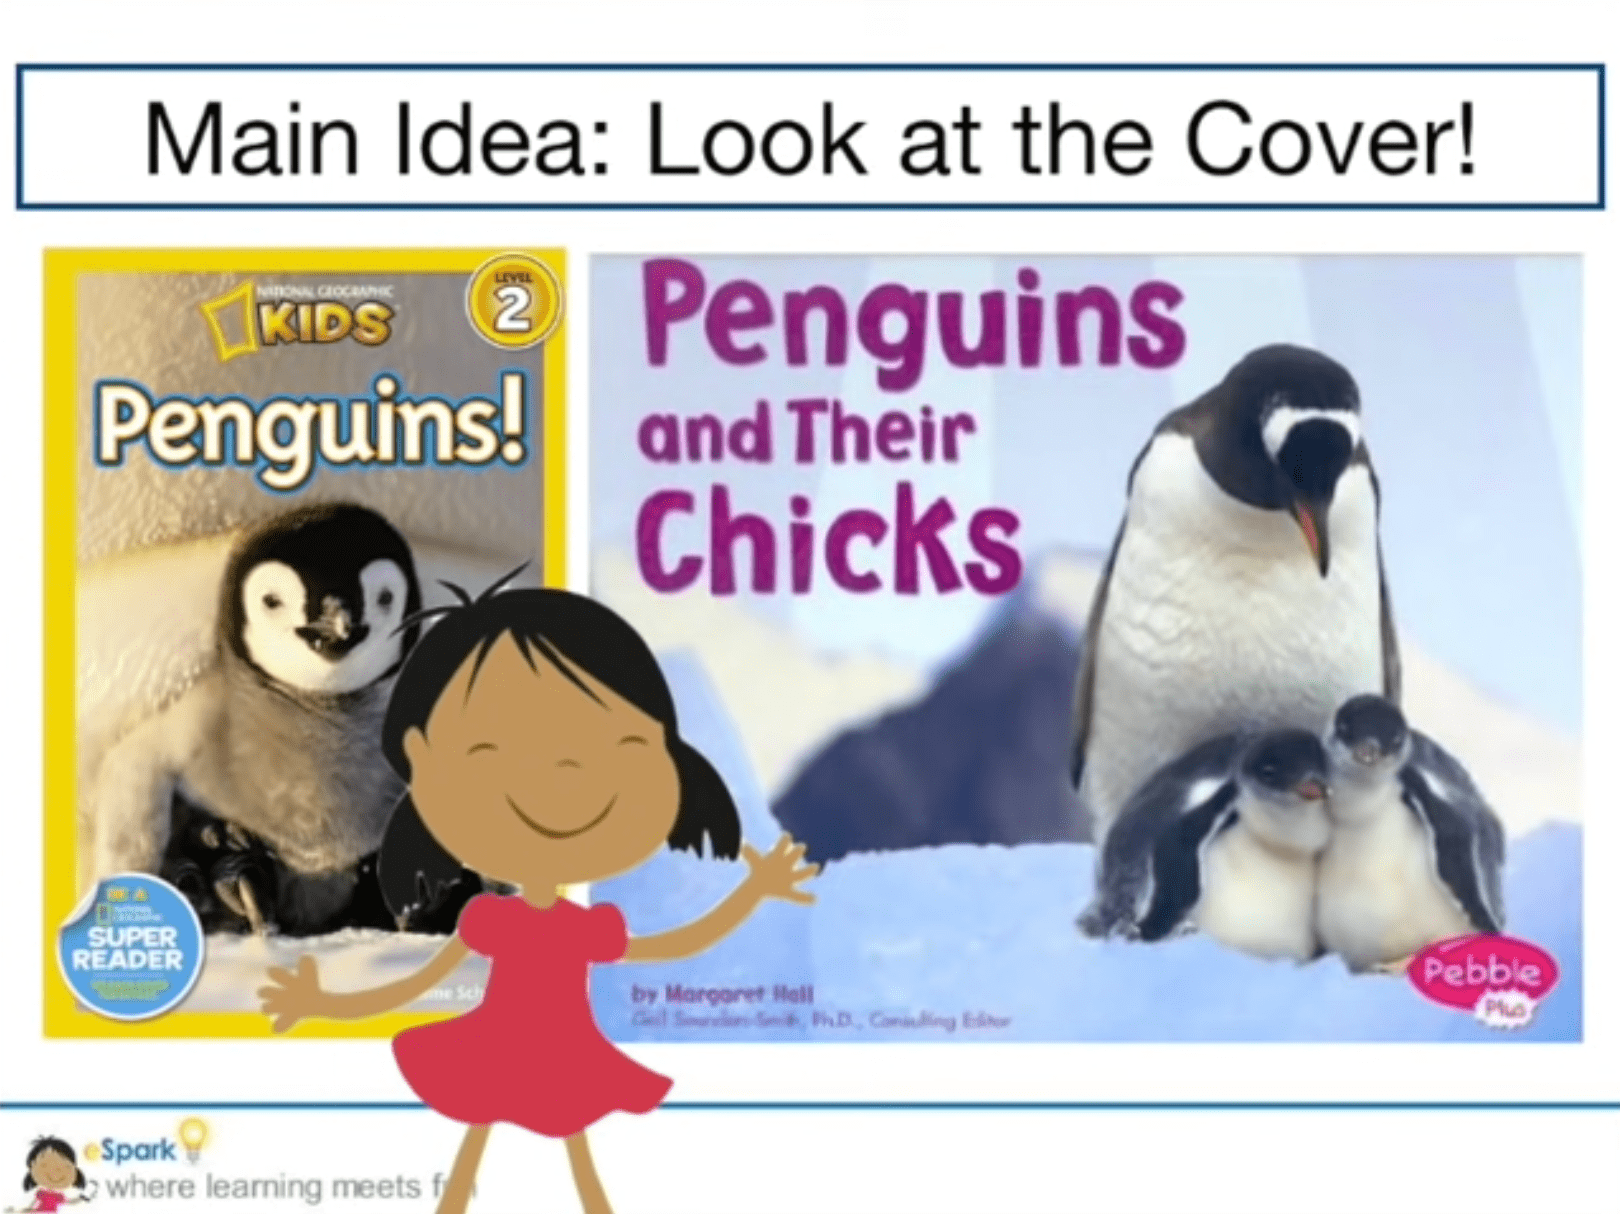 Two book covers, both featuring penguins